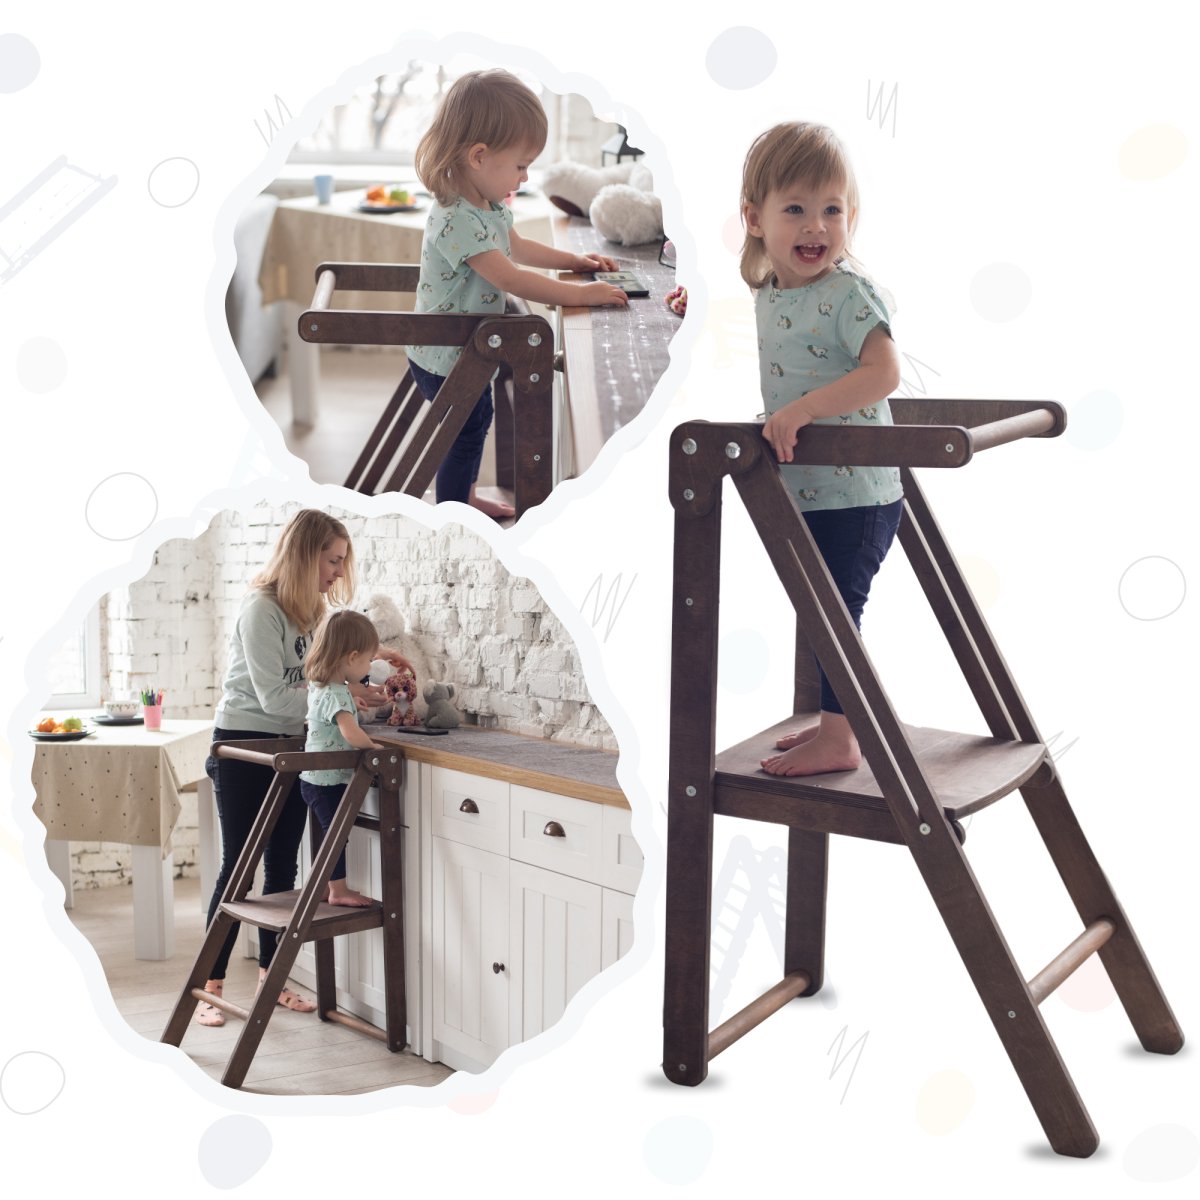 Wooden Step Stool For Preschool - Kid Chair That Grows - Chocolate